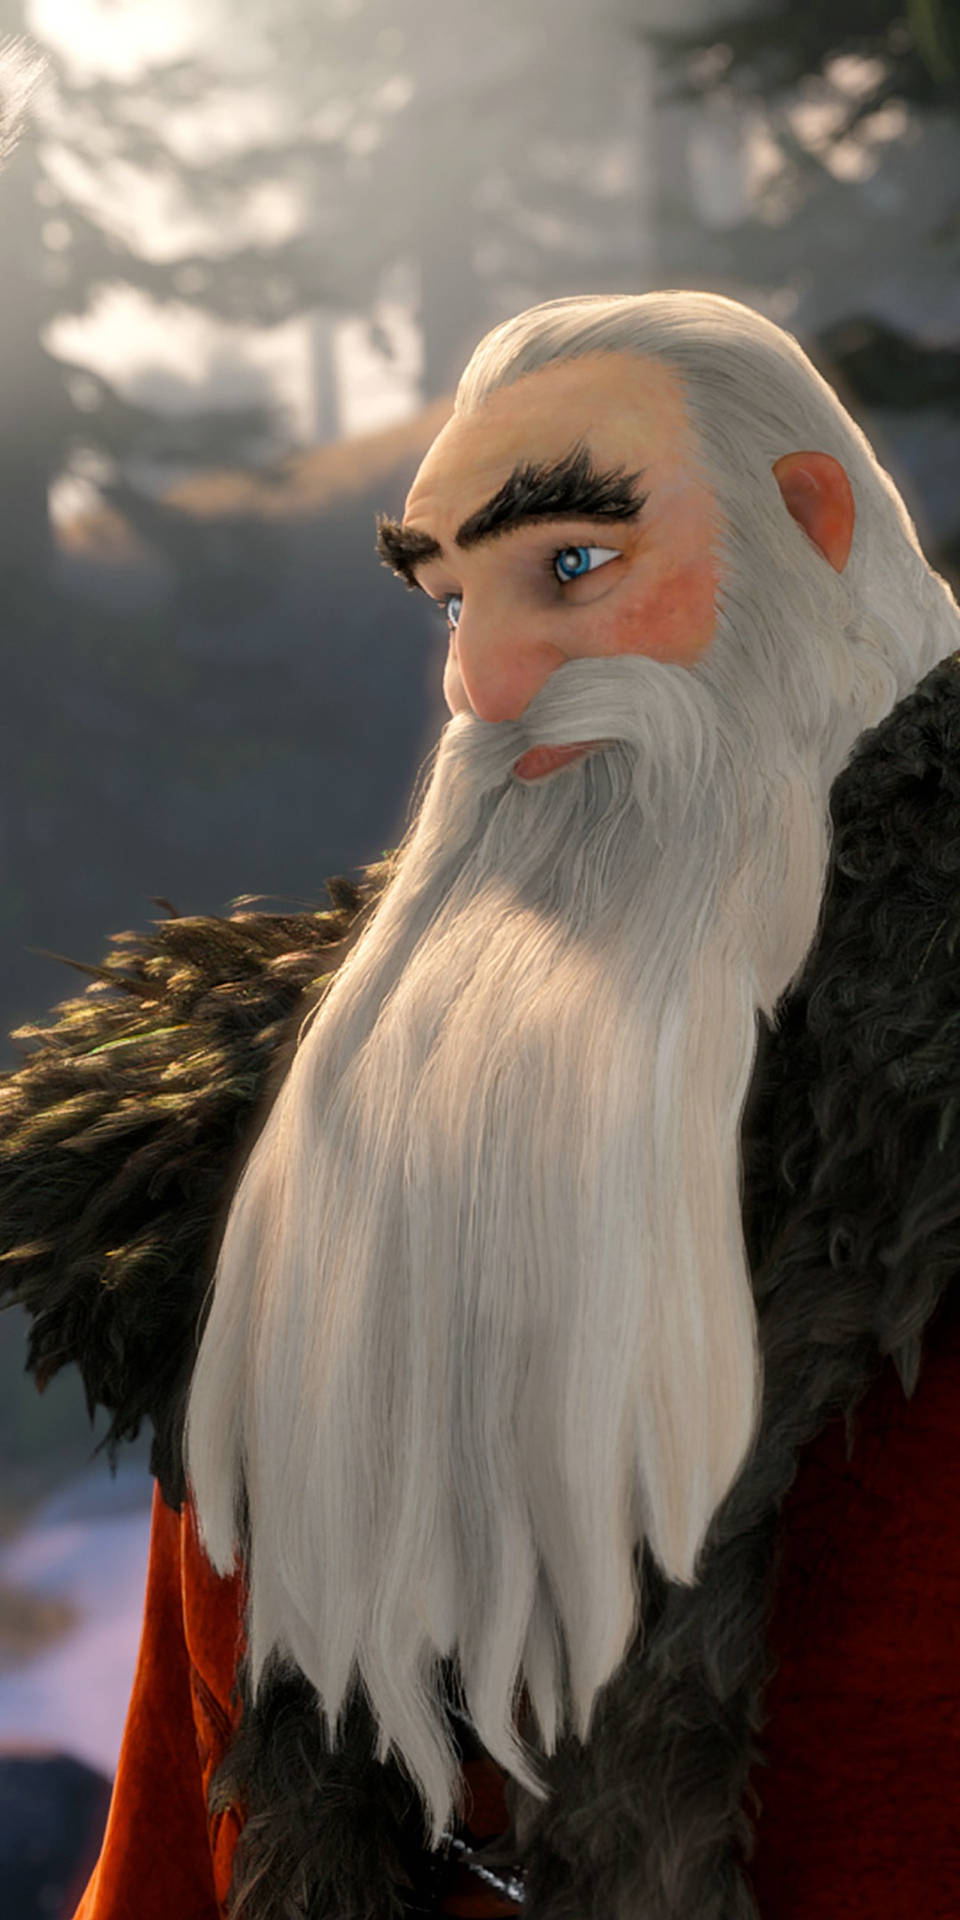 santa from rise of the guardians